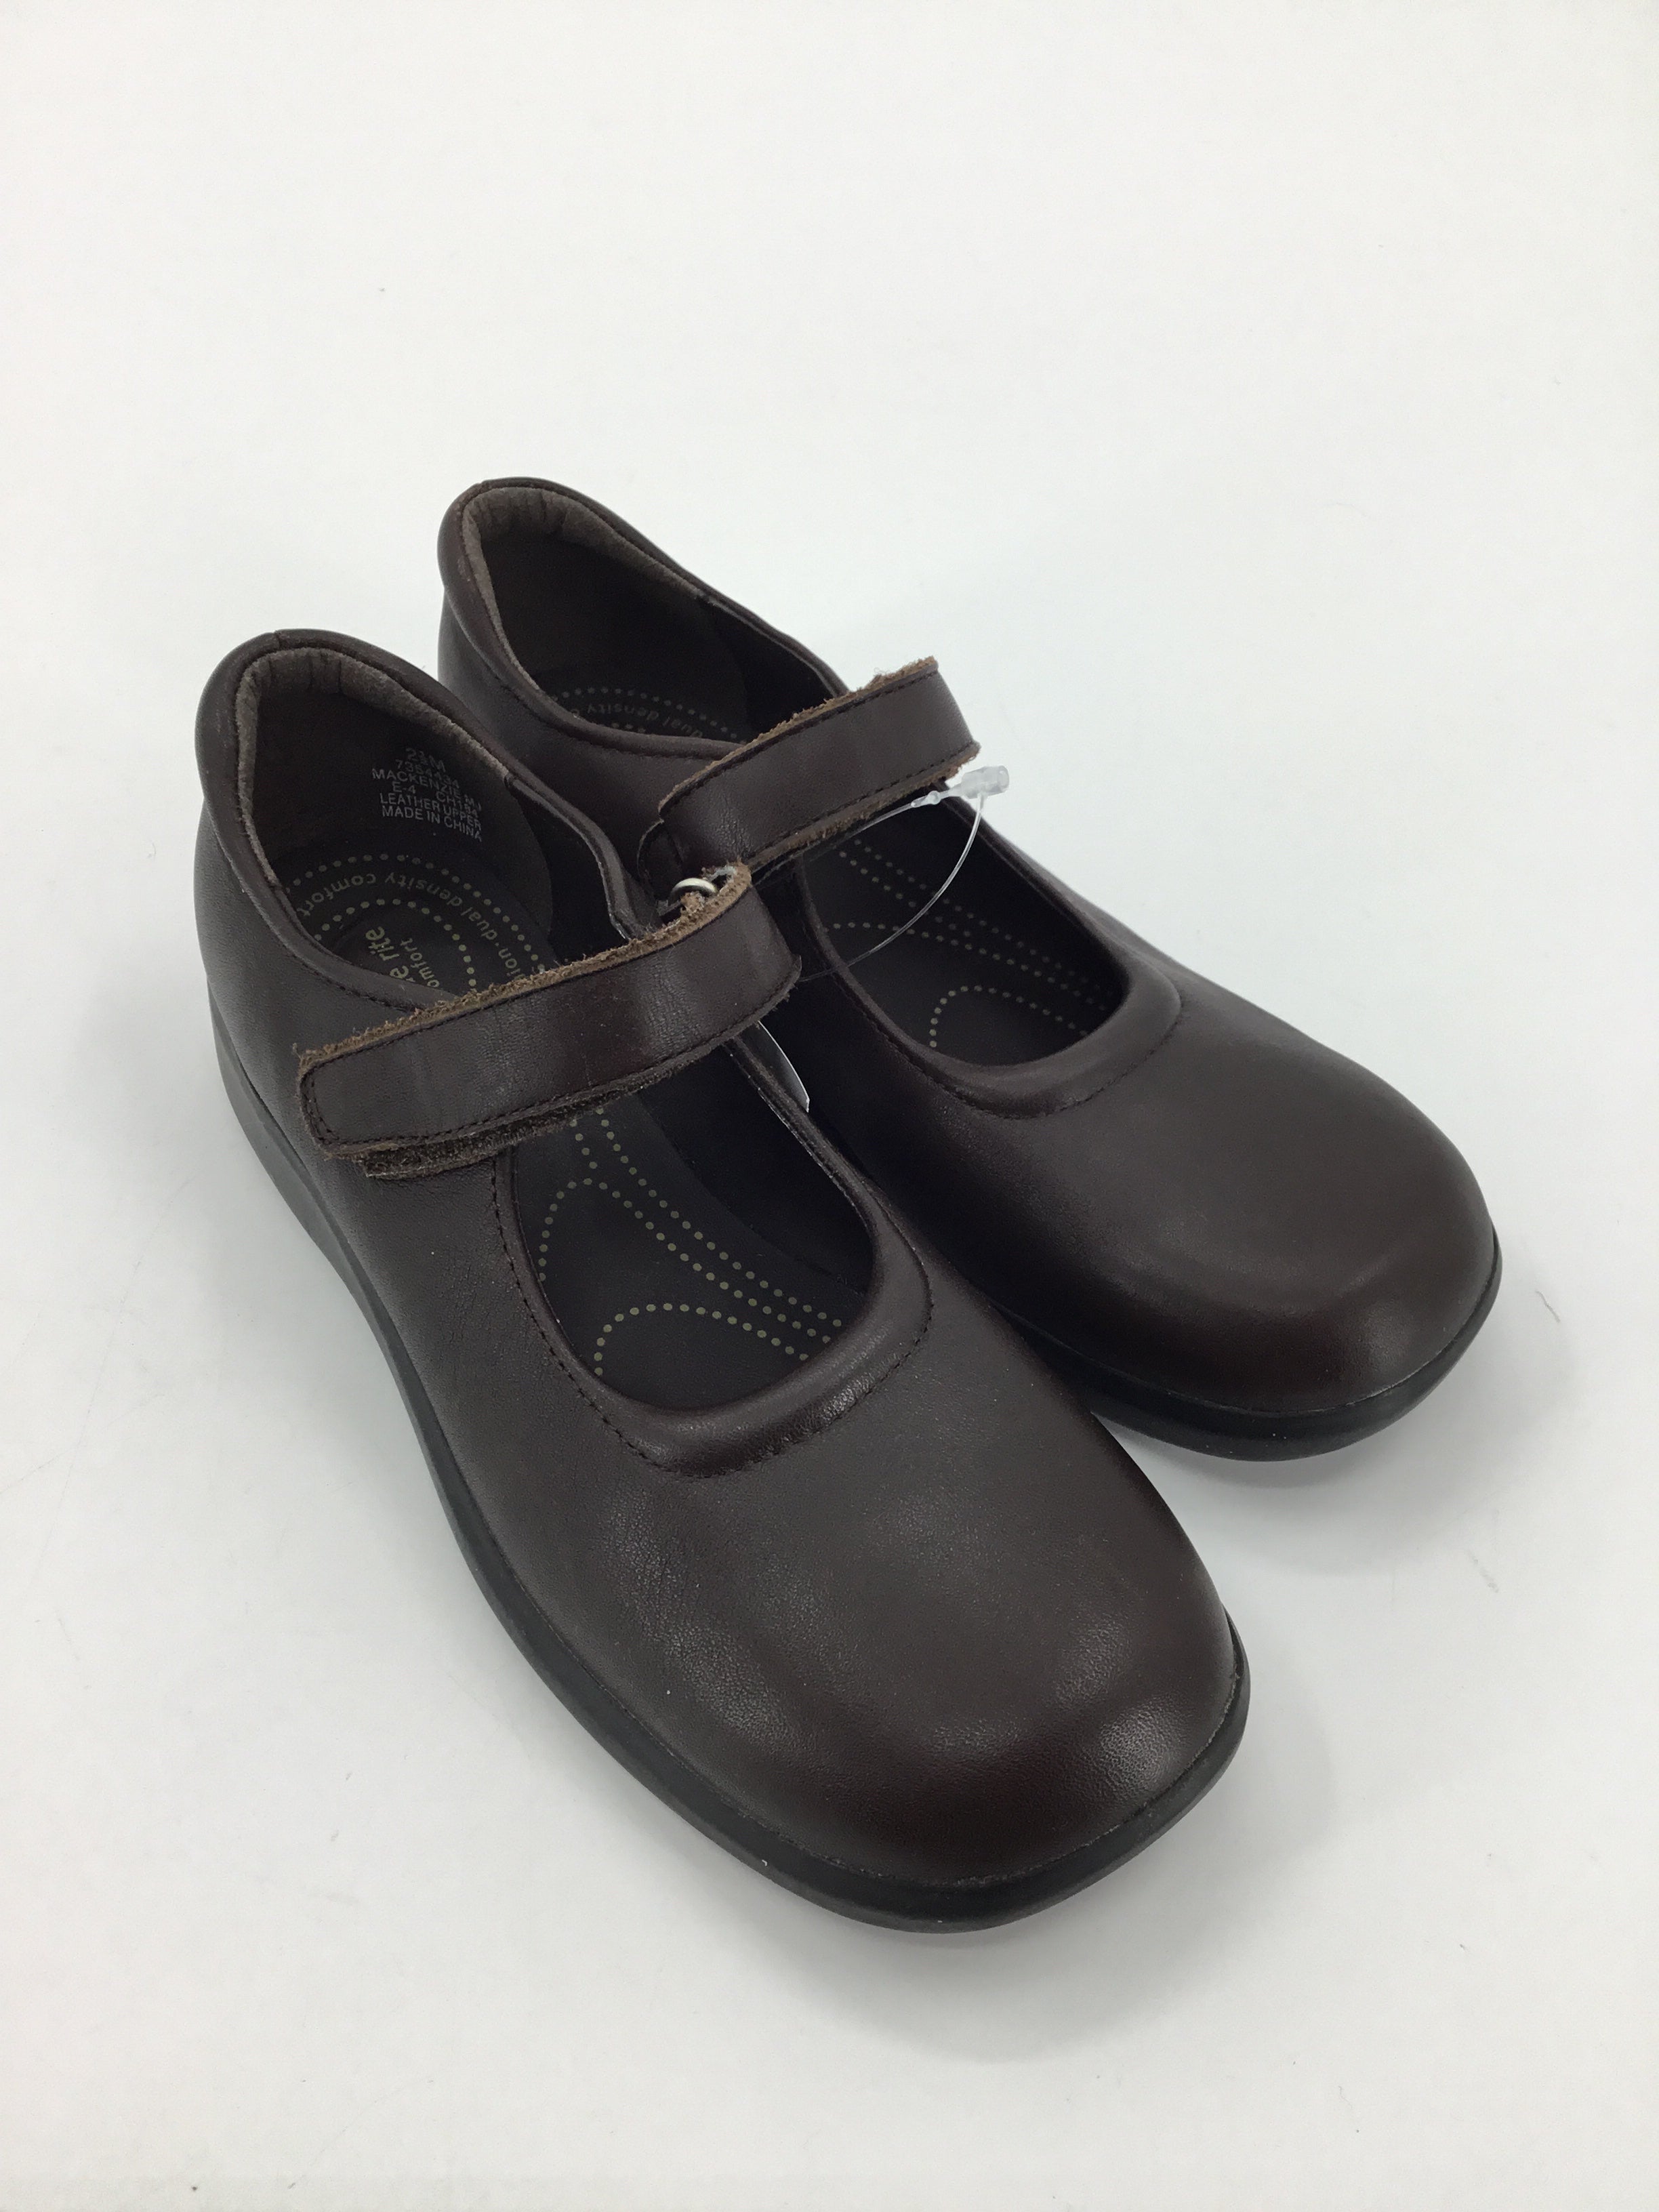 Stride Rite Child Size 2.5 Youth Brown Dress Shoes